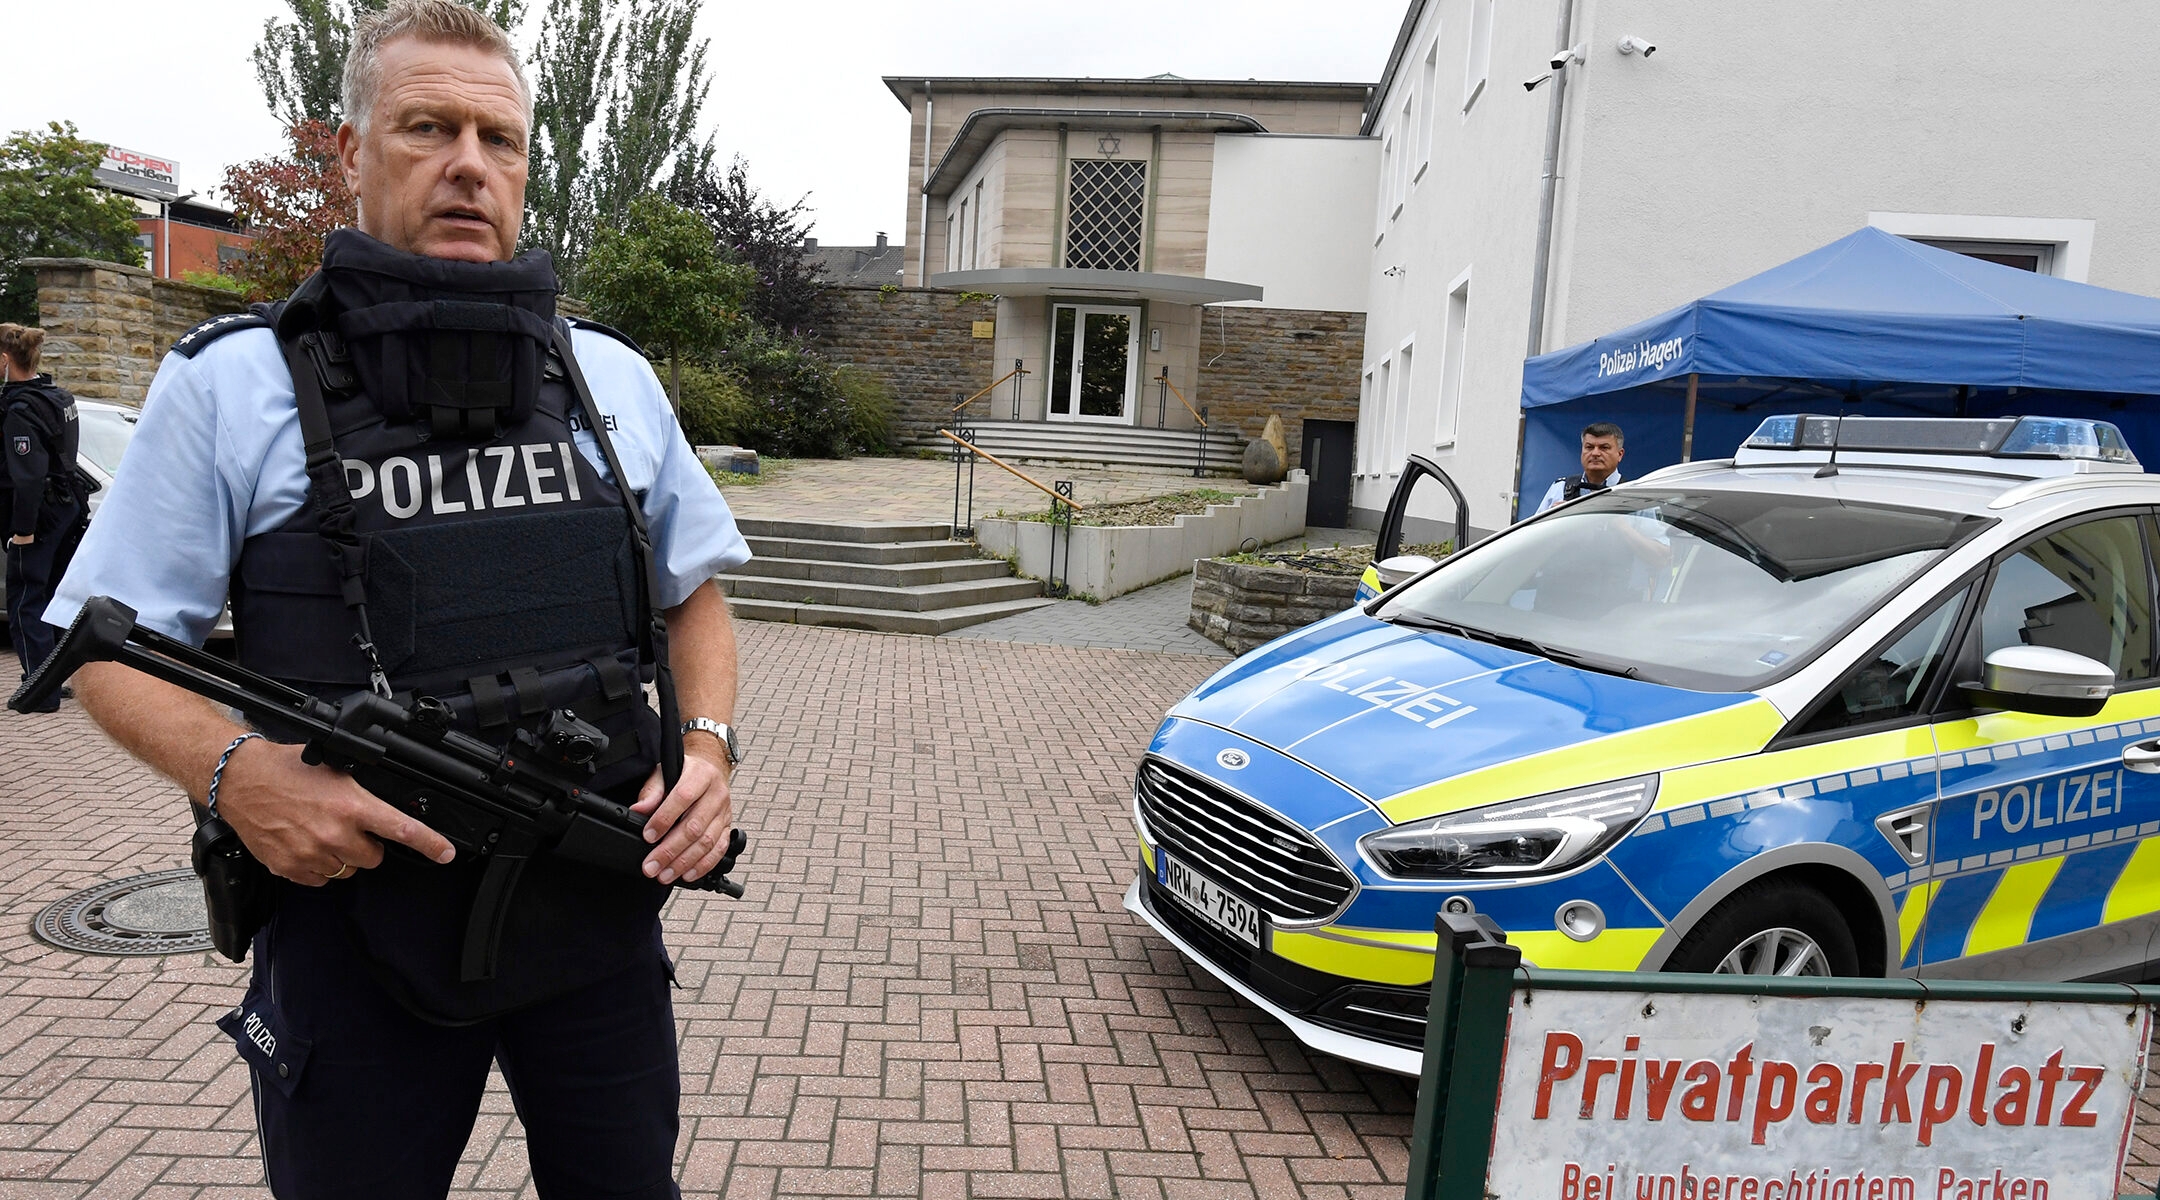 Police guard the synagogue of Hagen, Germany on Sept. 16, 2021. (Roberto Pfeil/picture alliance via Getty Images)